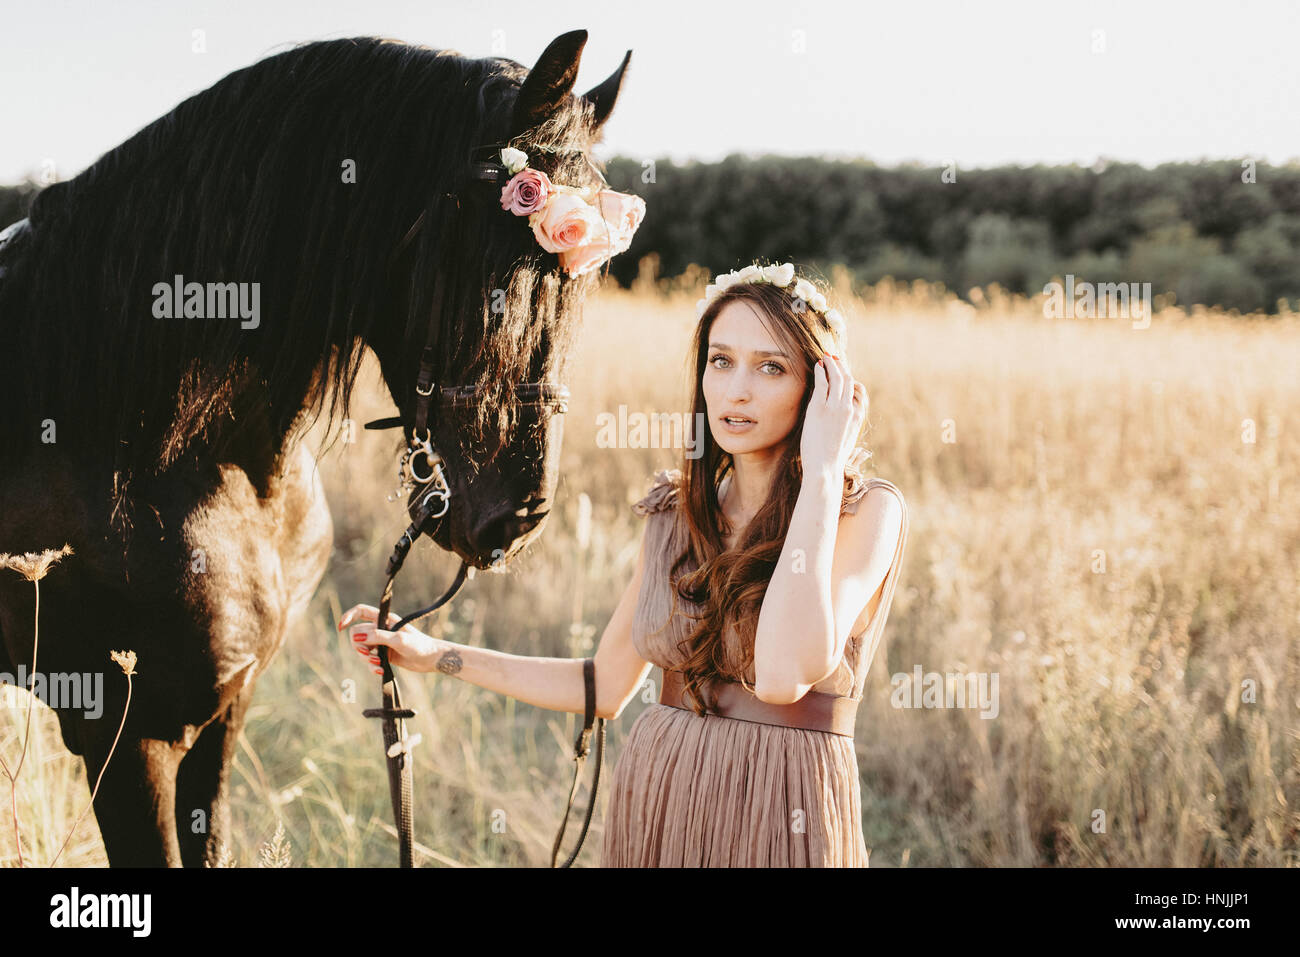 Caucasian woman wearing a beige flowy dress and flower crown, holding the ropes of her black horse, looking at the camera Stock Photo